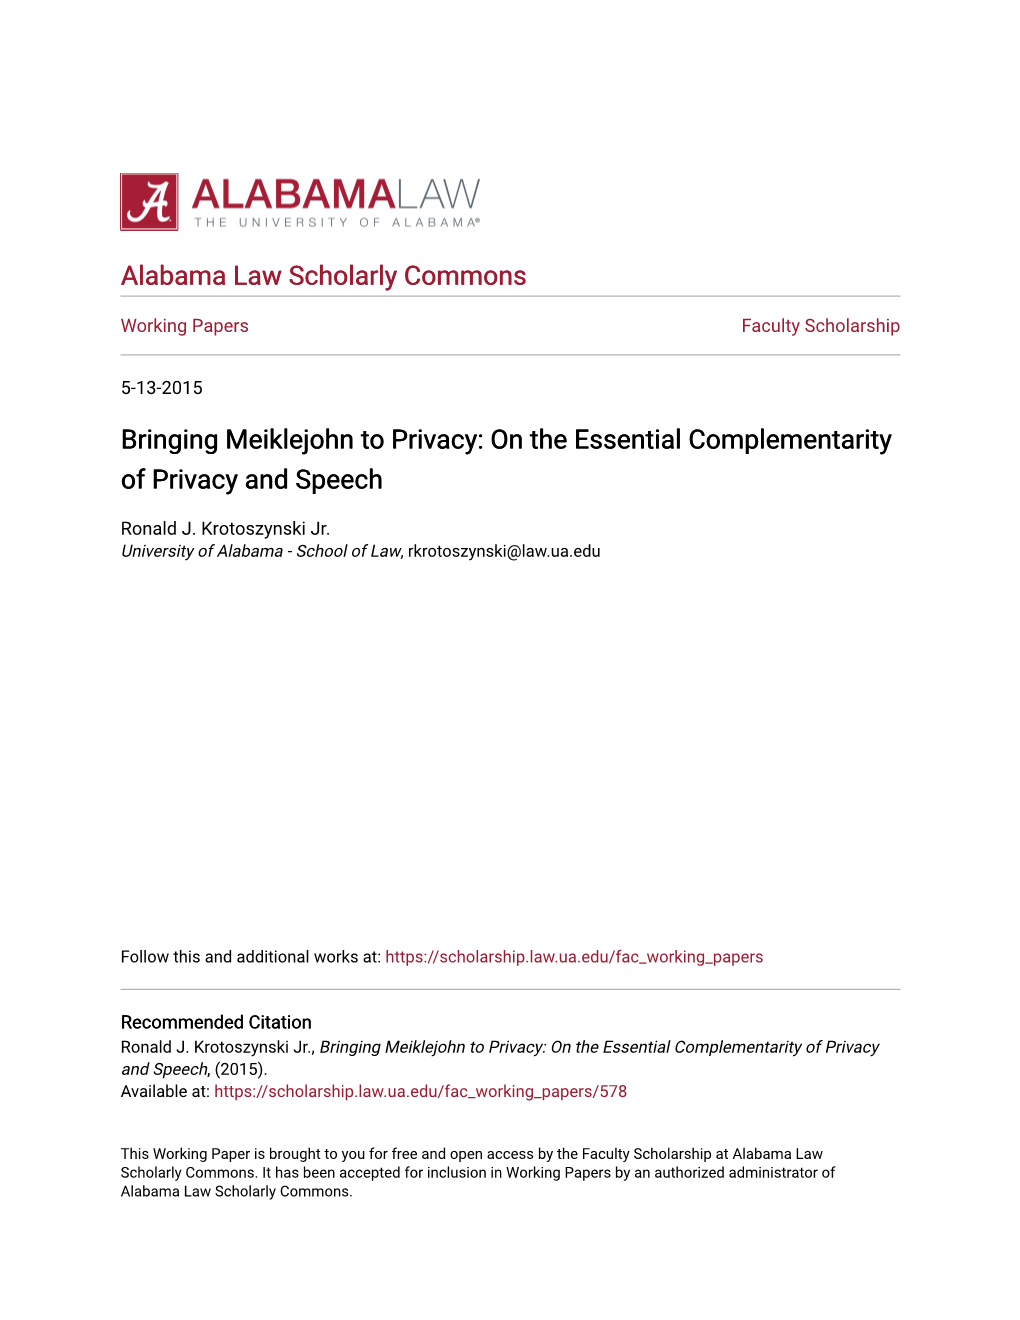 Bringing Meiklejohn to Privacy: on the Essential Complementarity of Privacy and Speech